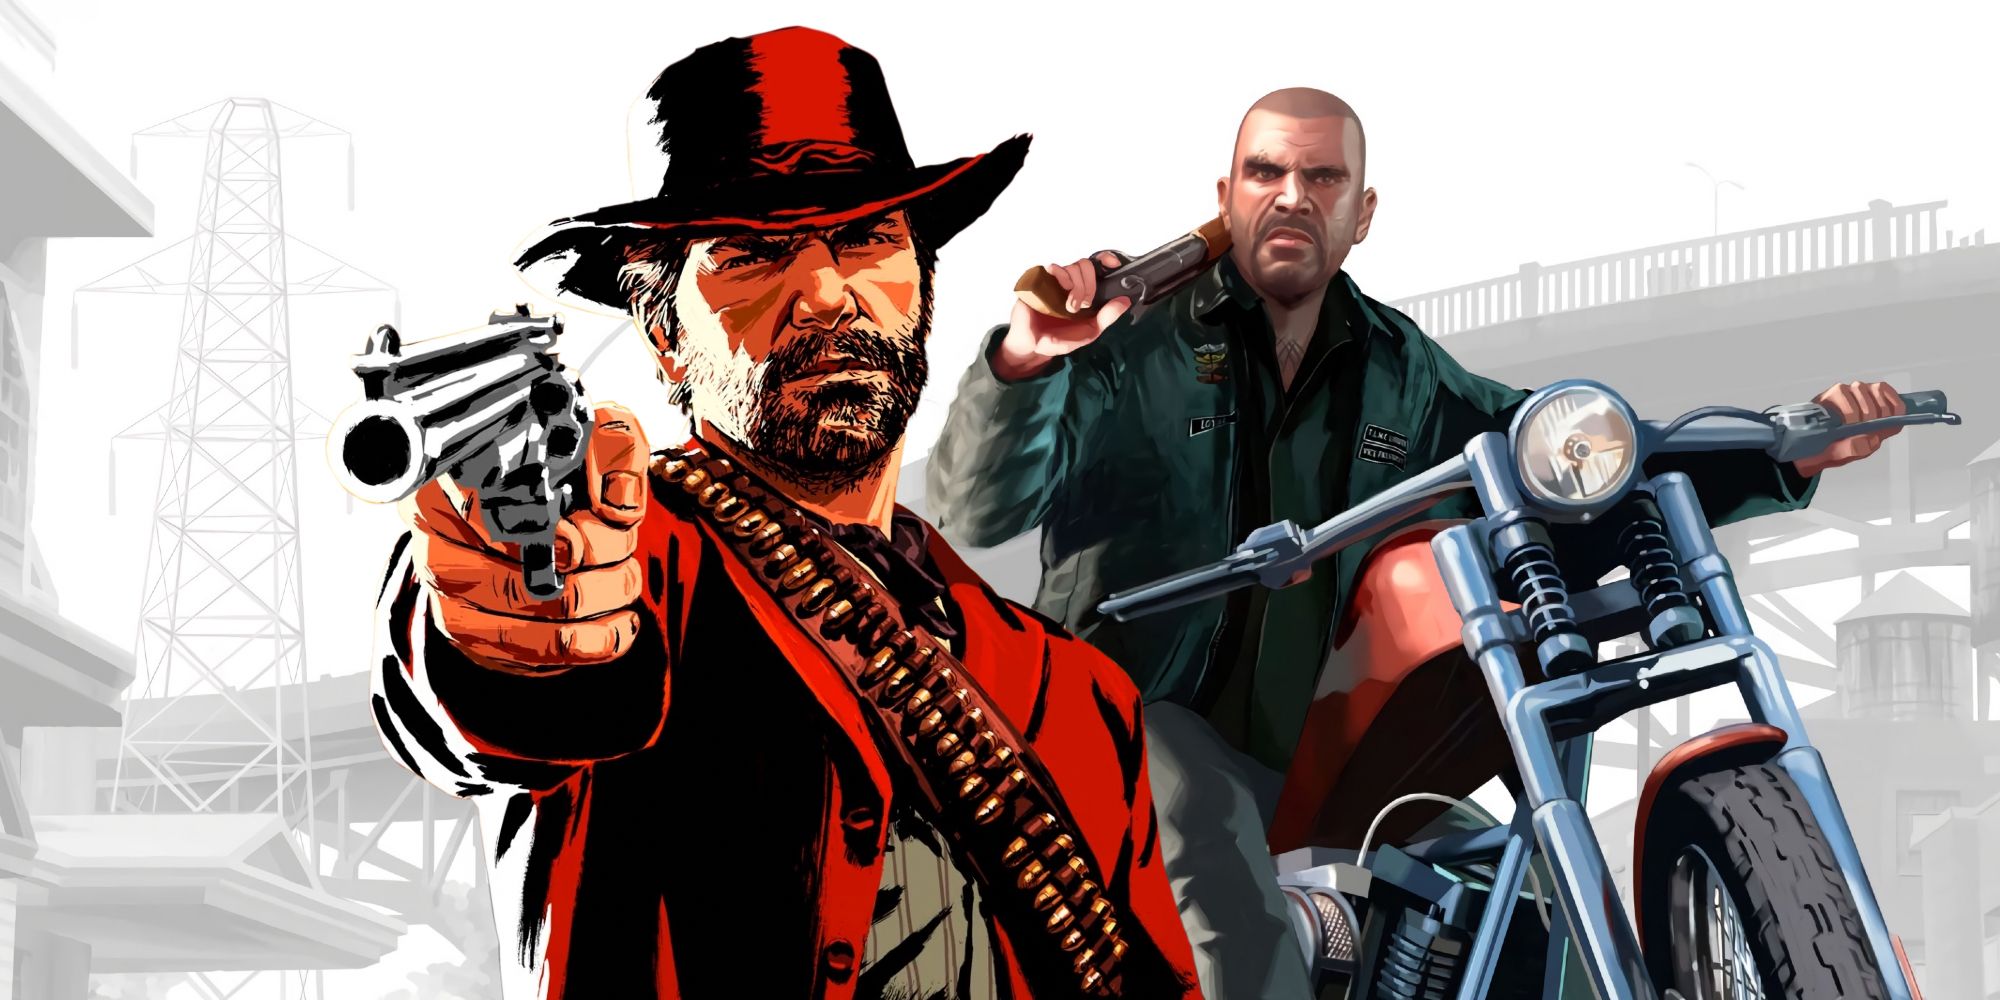 Illustrated artwork of Arthur Morgan from RDR2 next to Johnny Klebitz on his motorcycle from GTA 4's The Lost and Damned expansion.